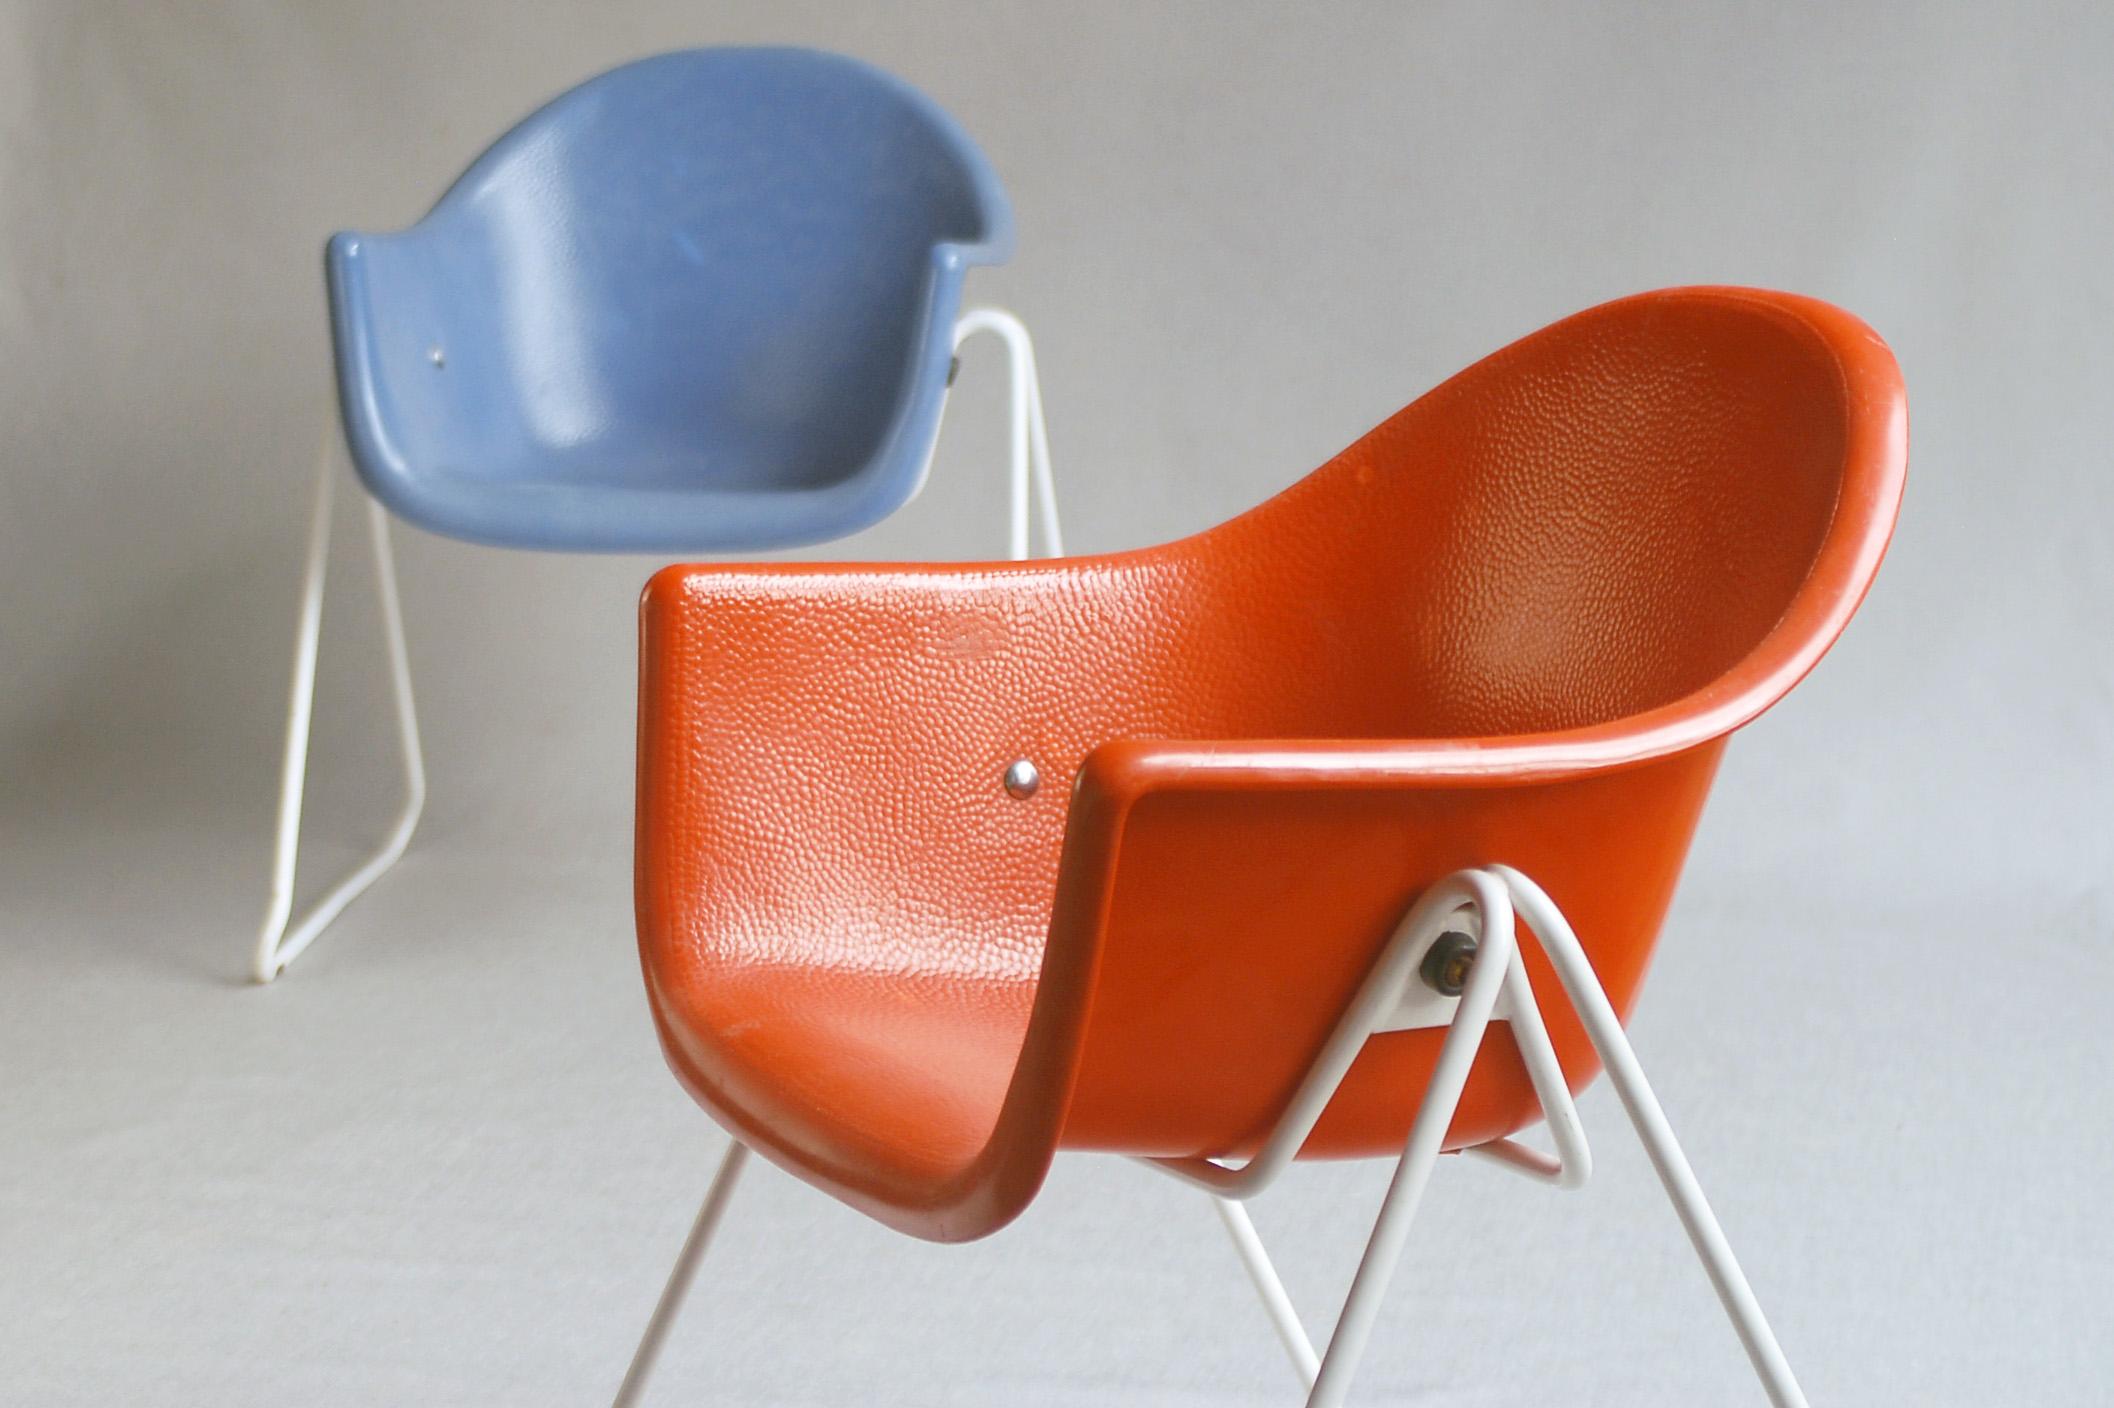 Pair of Walter Papst kids chairs, Wilkhahn, Germany 1961 - 1968 For Sale 2